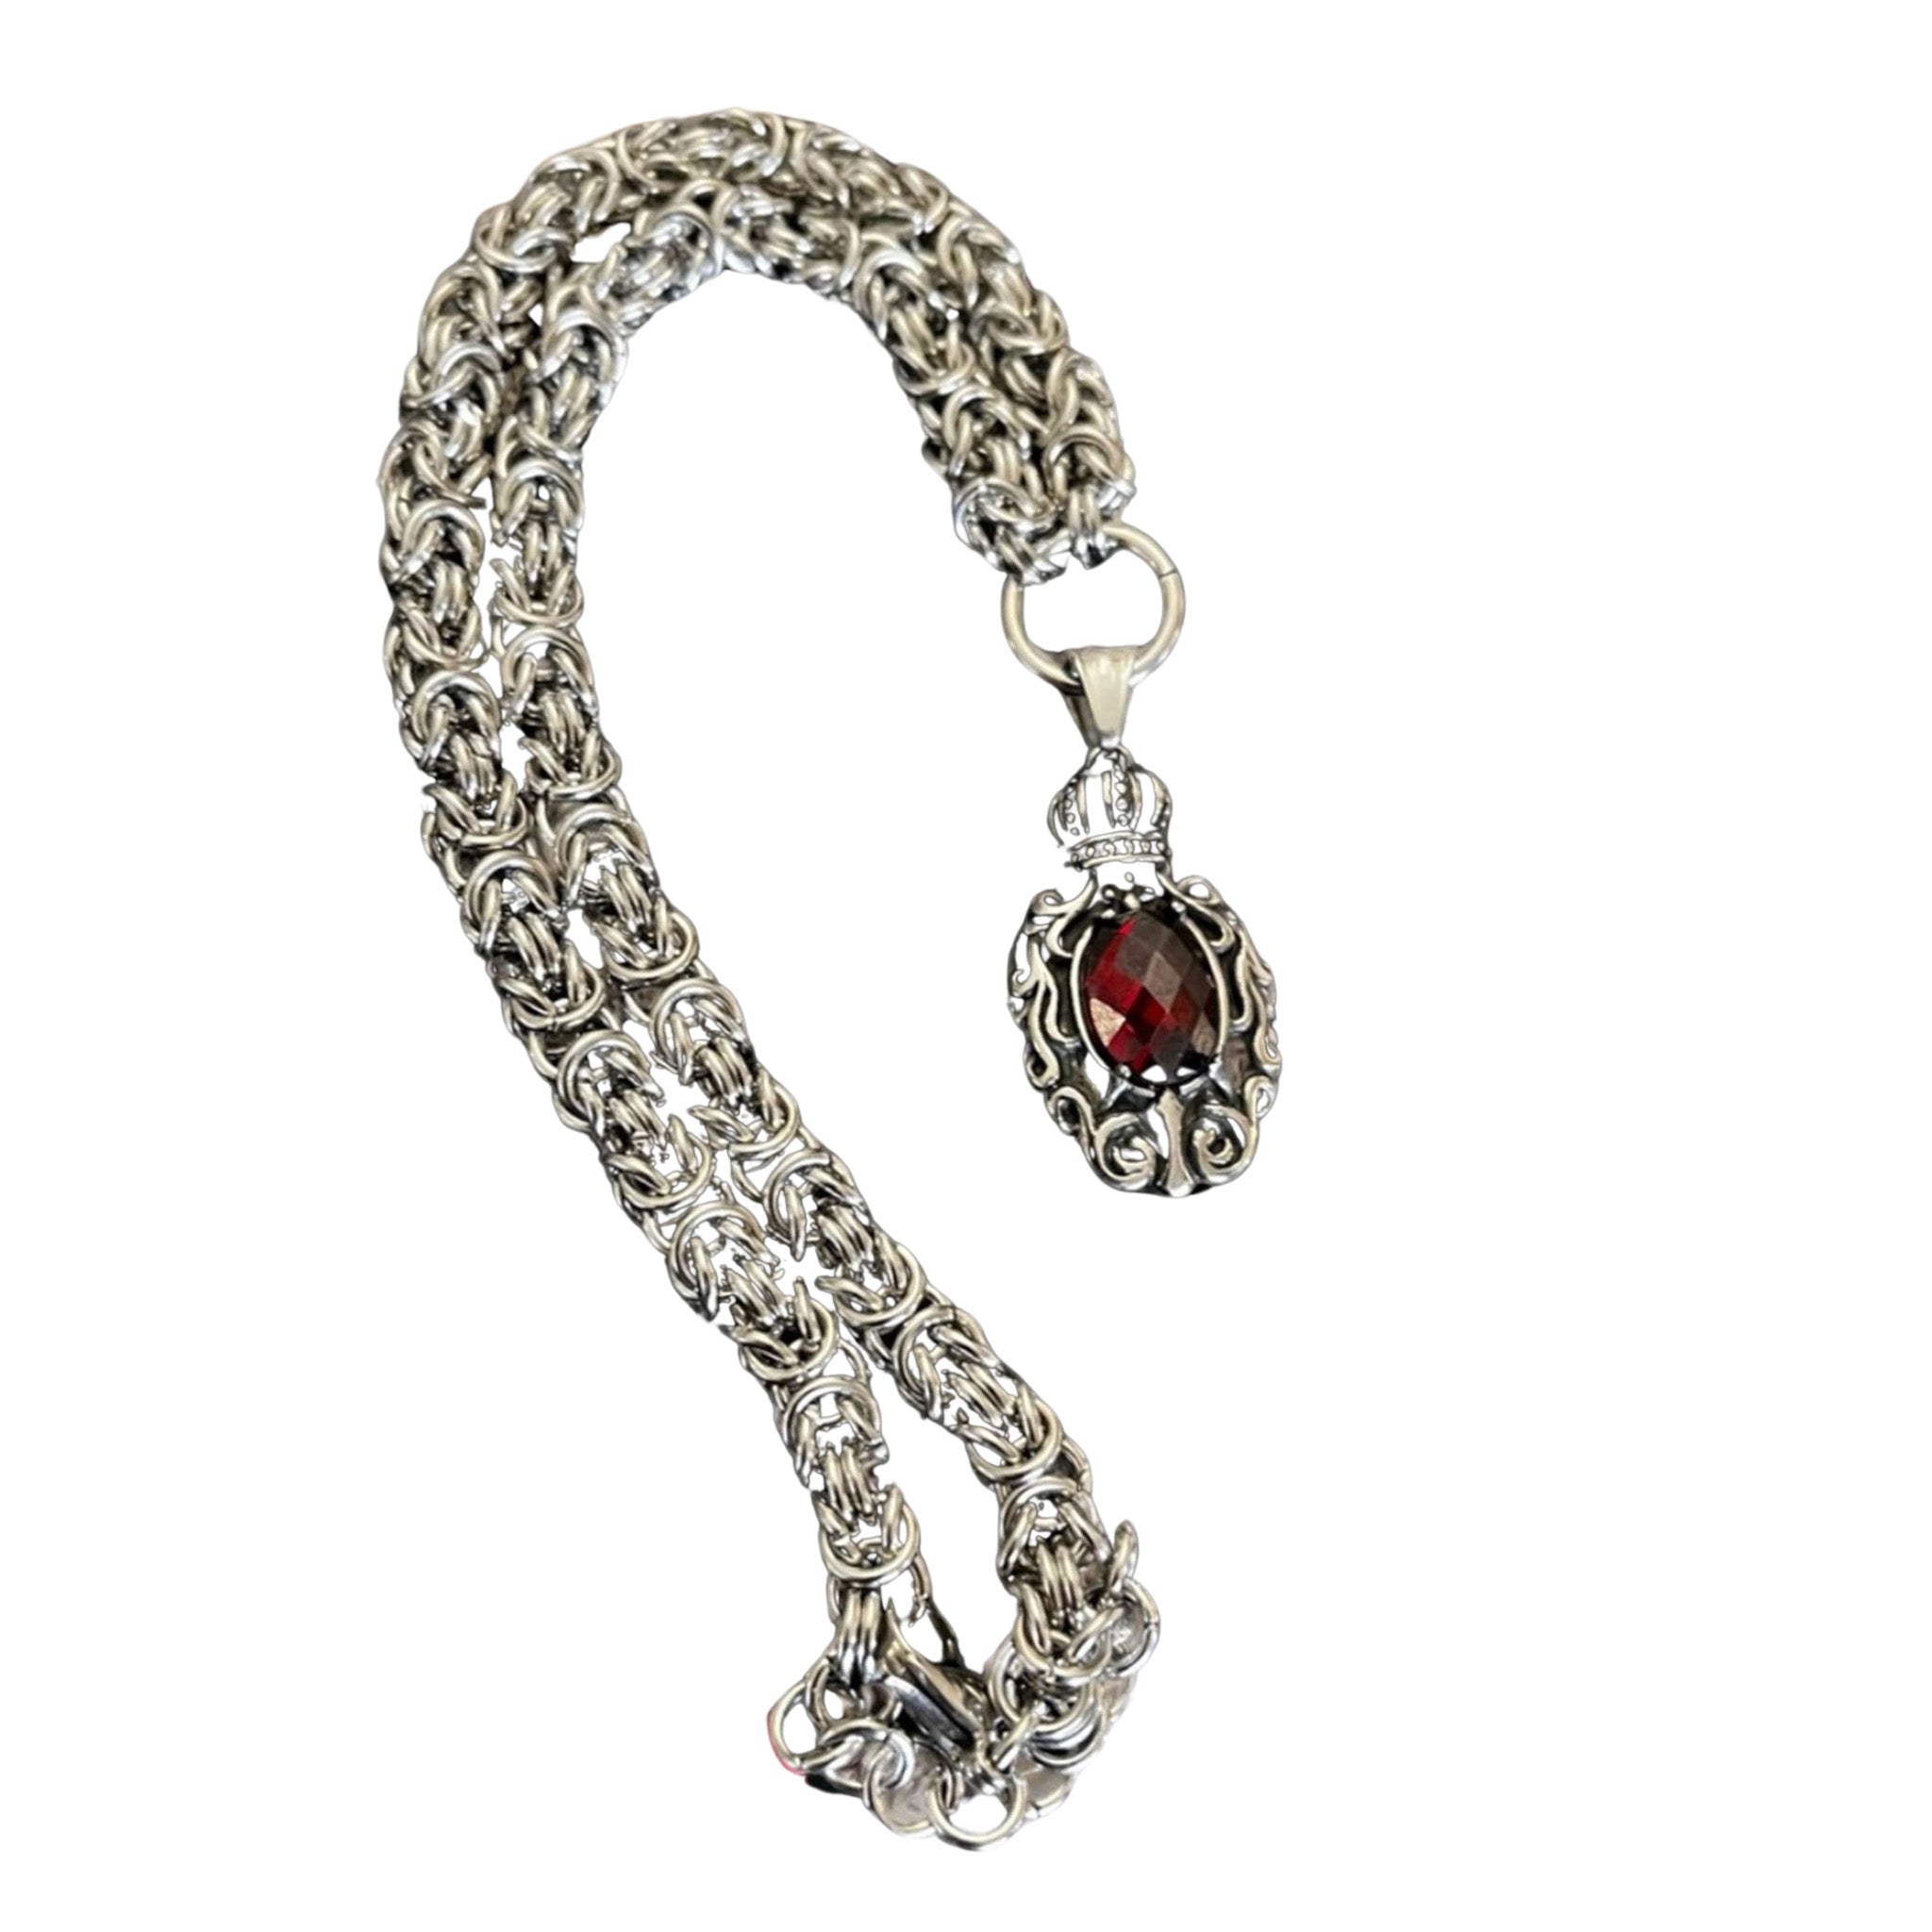 Garnet Crown Handmade Byzantine Stainless Chainmail Necklace